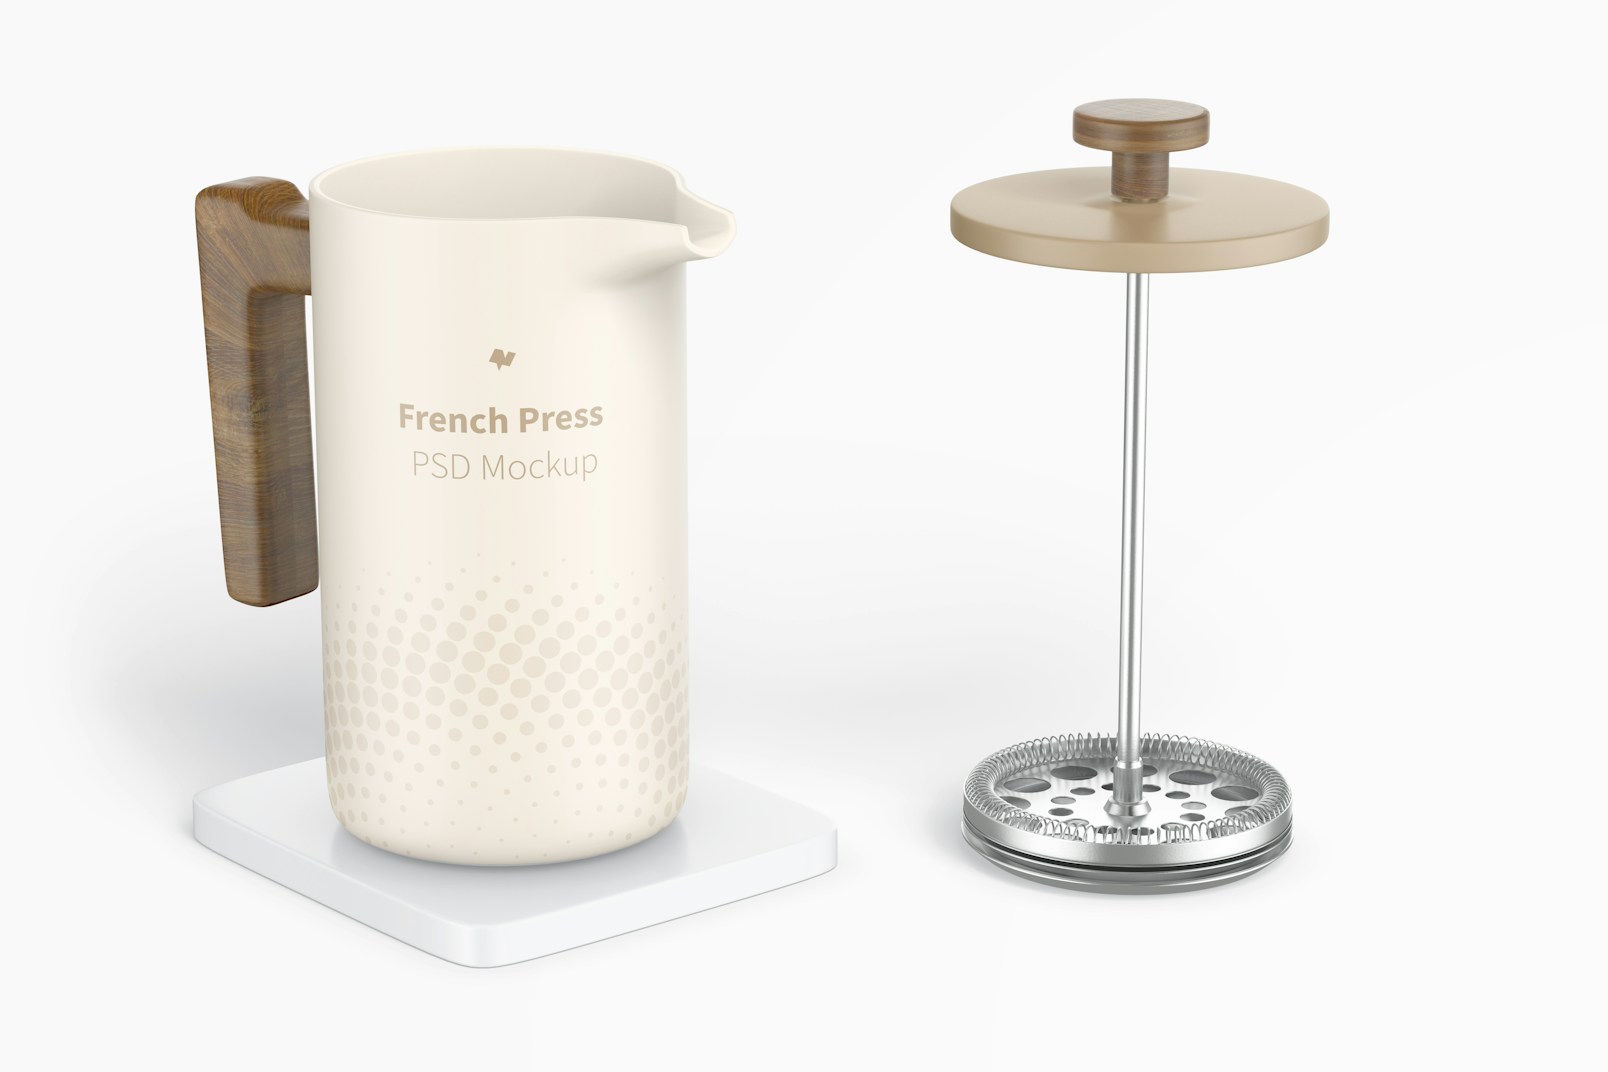 French Press Coffee Maker Mockup, Opened